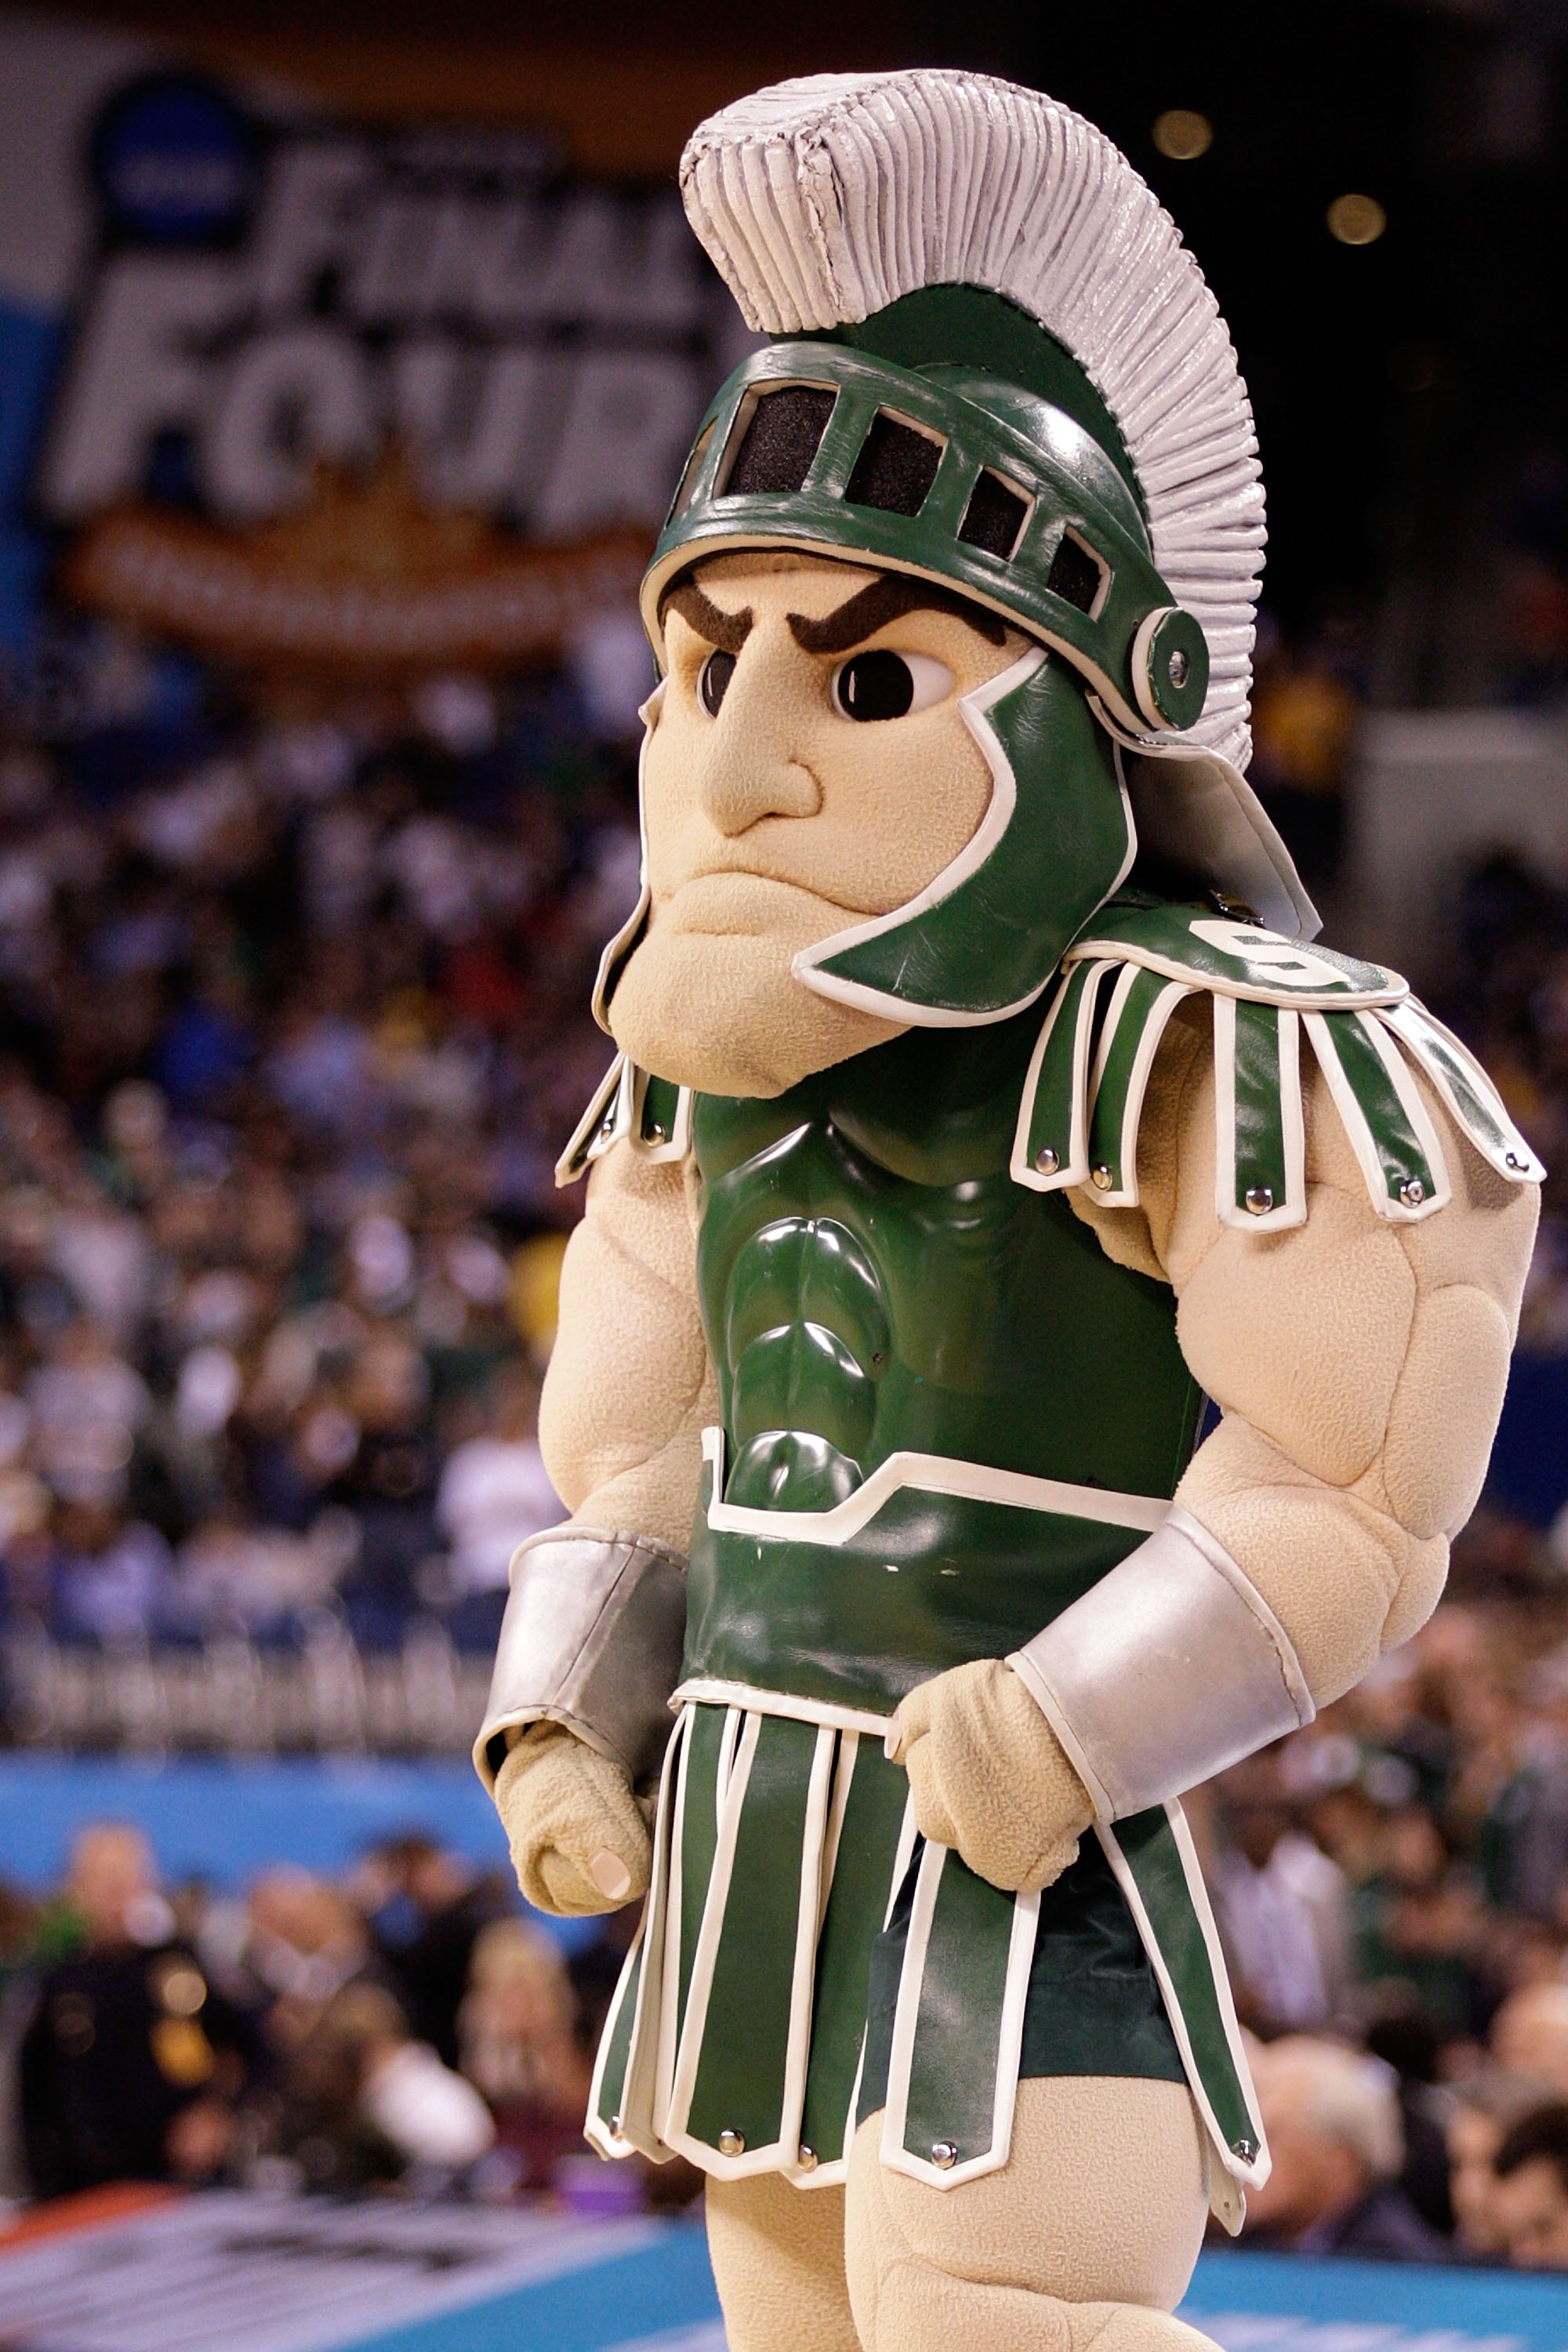 INDIANAPOLIS - APRIL 03:  Sparty, the mascot of the Michigan State Spartans, performs on the court before the Spartans take on the Butler Bulldogs during the National Semifinal game of the 2010 NCAA Division I Men's Basketball Championship on April 3, 201